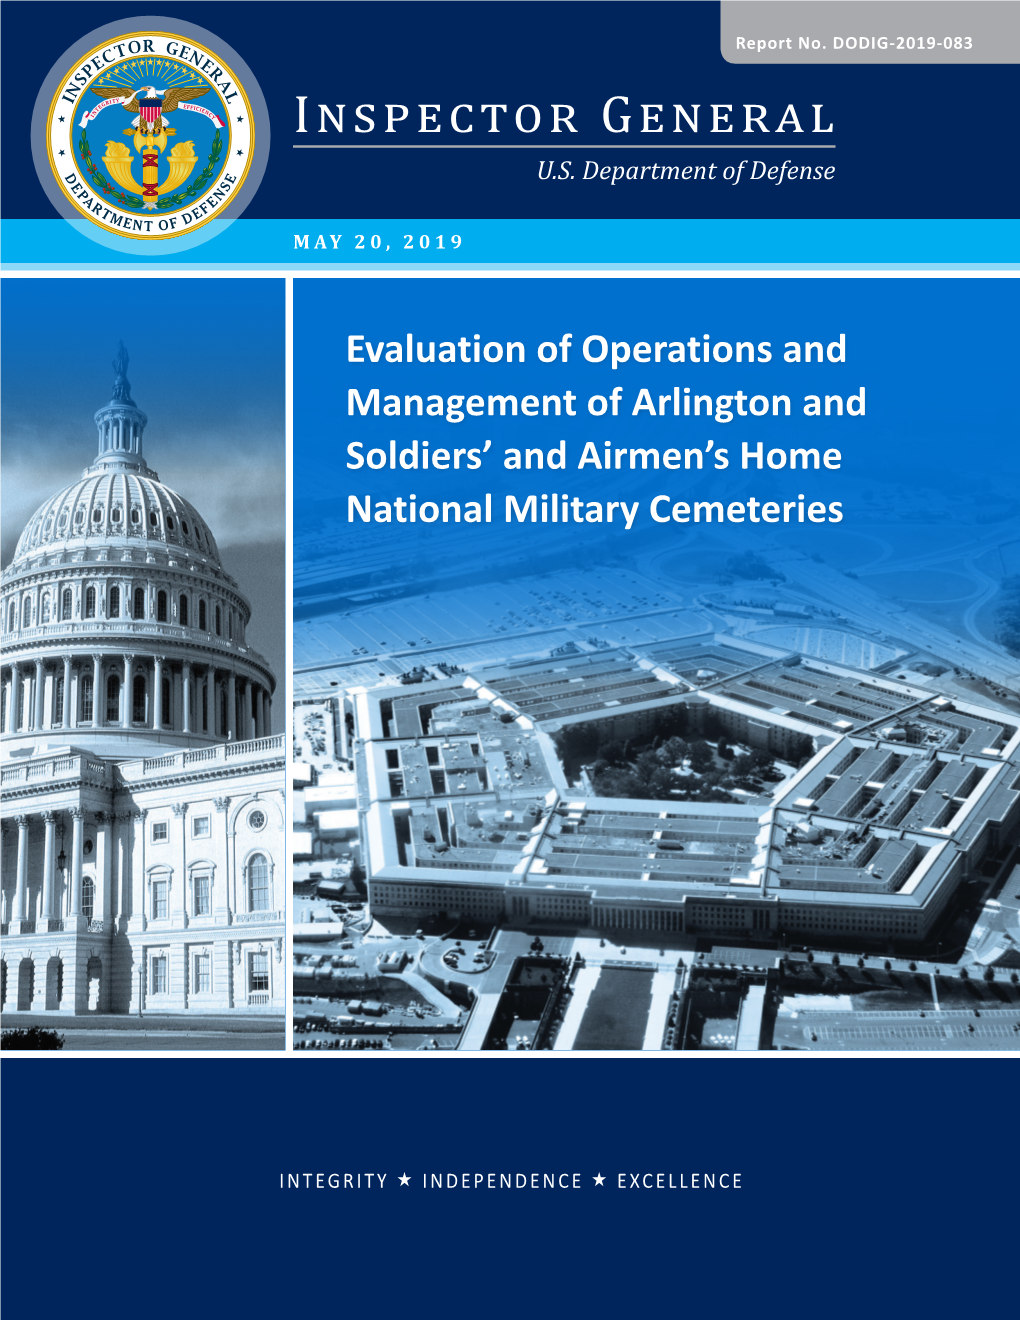 Report No. DODIG-2019-083: Evaluation of Operations and Management of Arlington and Soldiers' and Airmen's Home National